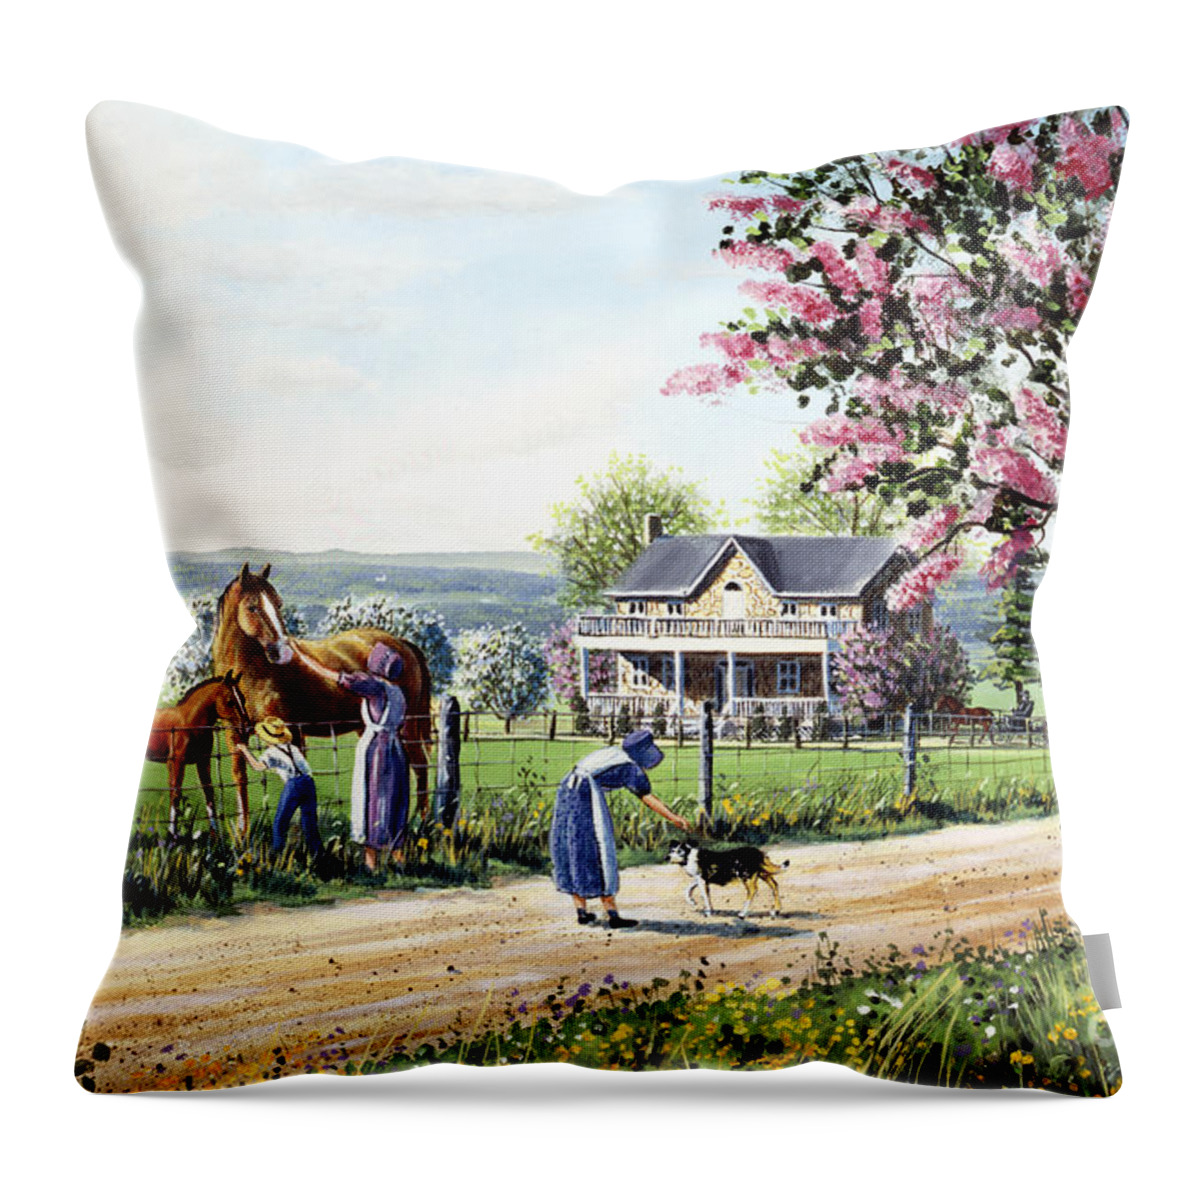 apple Blossoms Throw Pillow featuring the painting Welcome Home by Roger Witmer